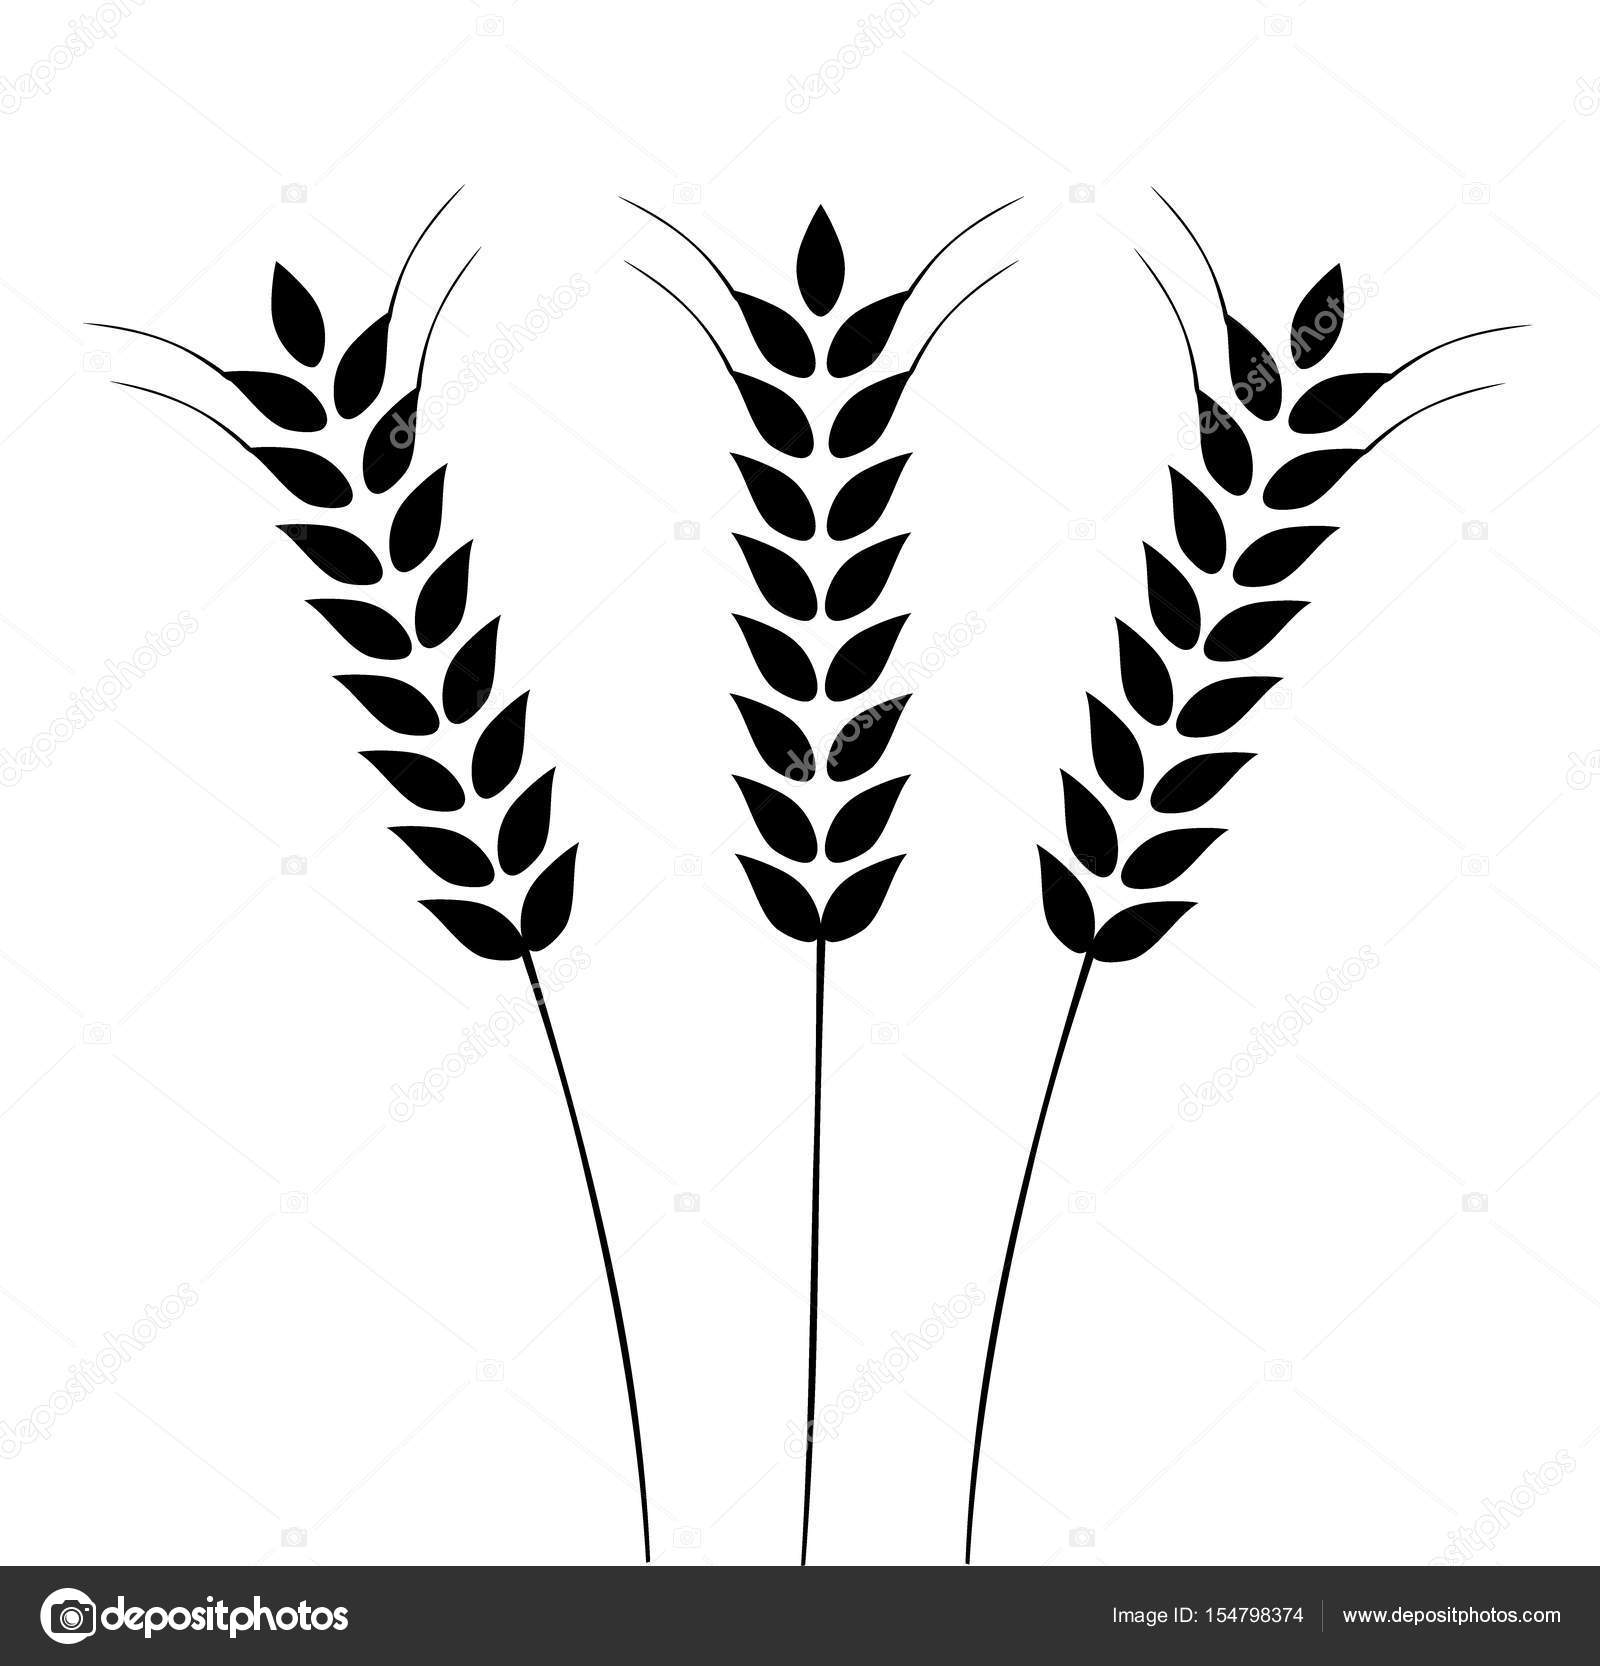 Wheat Plant Drawing at GetDrawings.com | Free for personal use Wheat ...